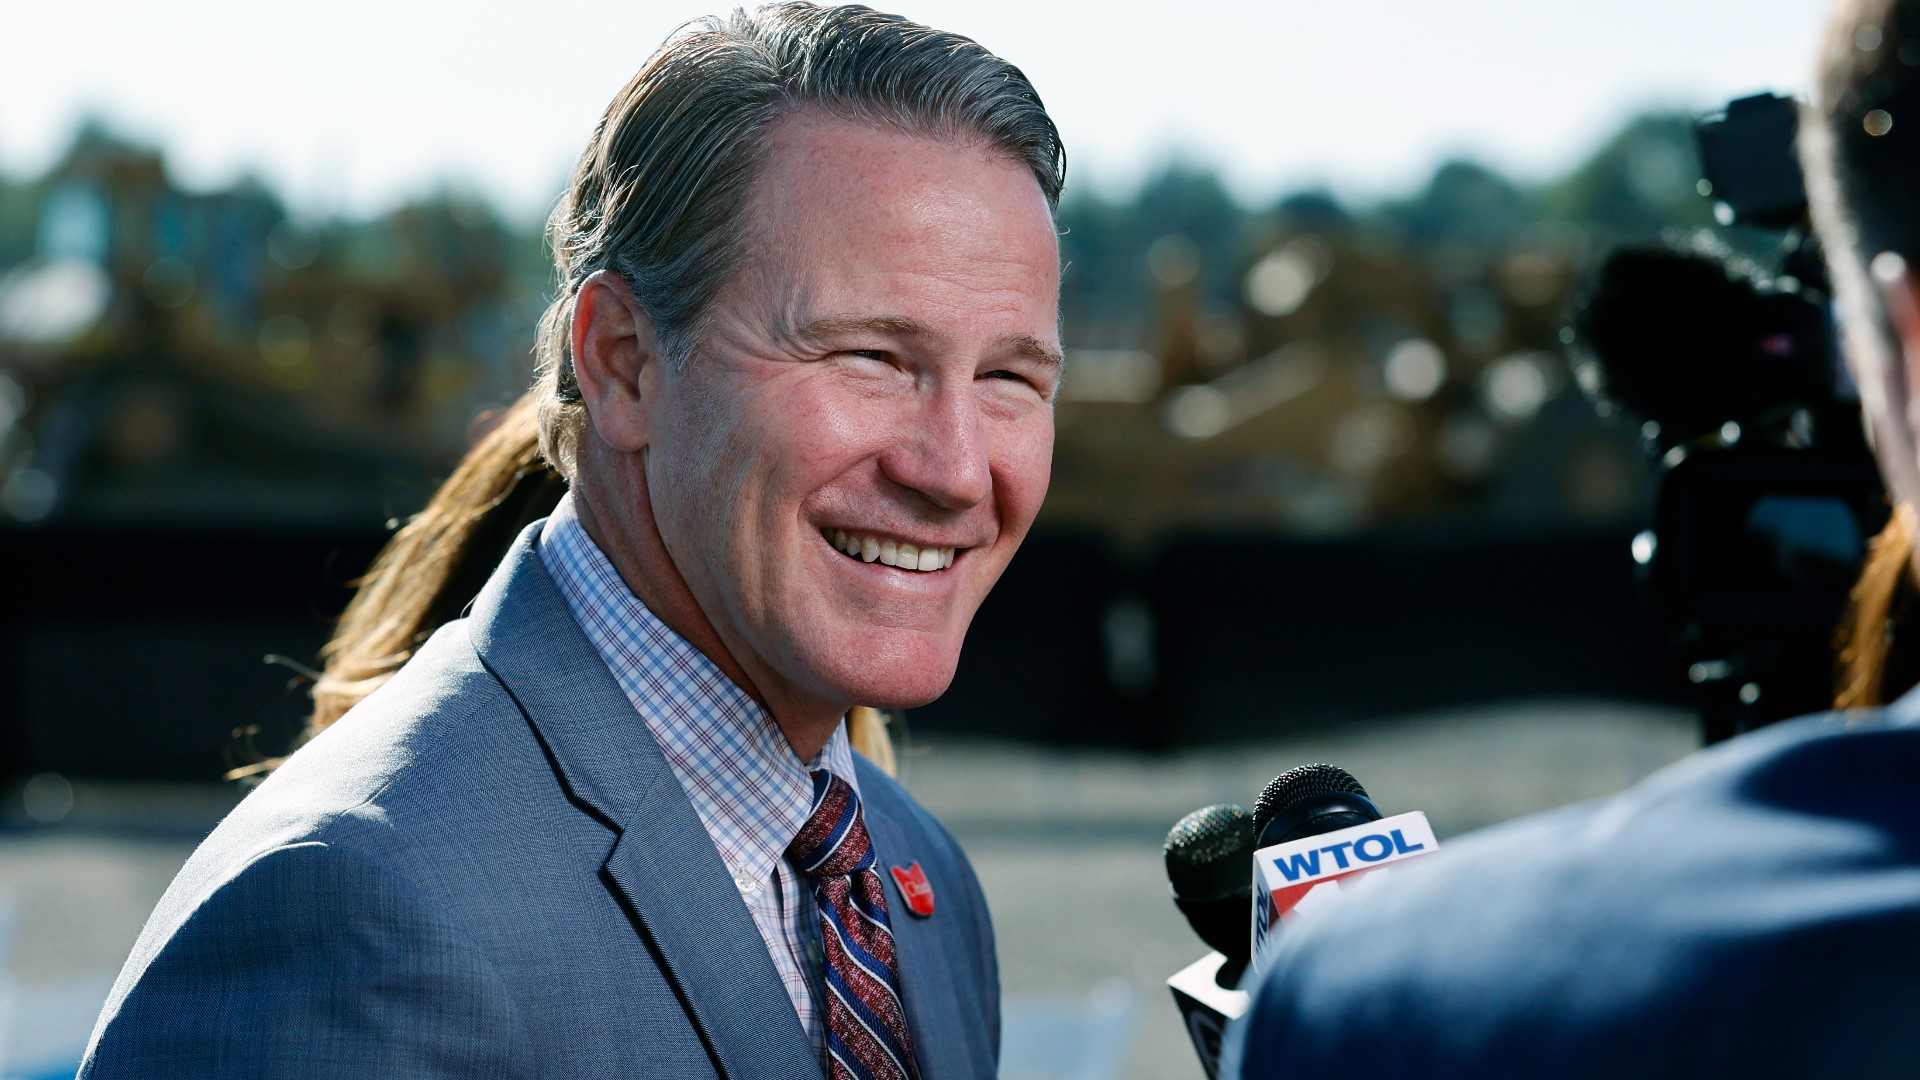 Lt. Governor Jon Husted (R-Ohio) was scheduled to be deposed by attorney’s involved in the First Energy Civil case, but according a source, that’s been delayed.